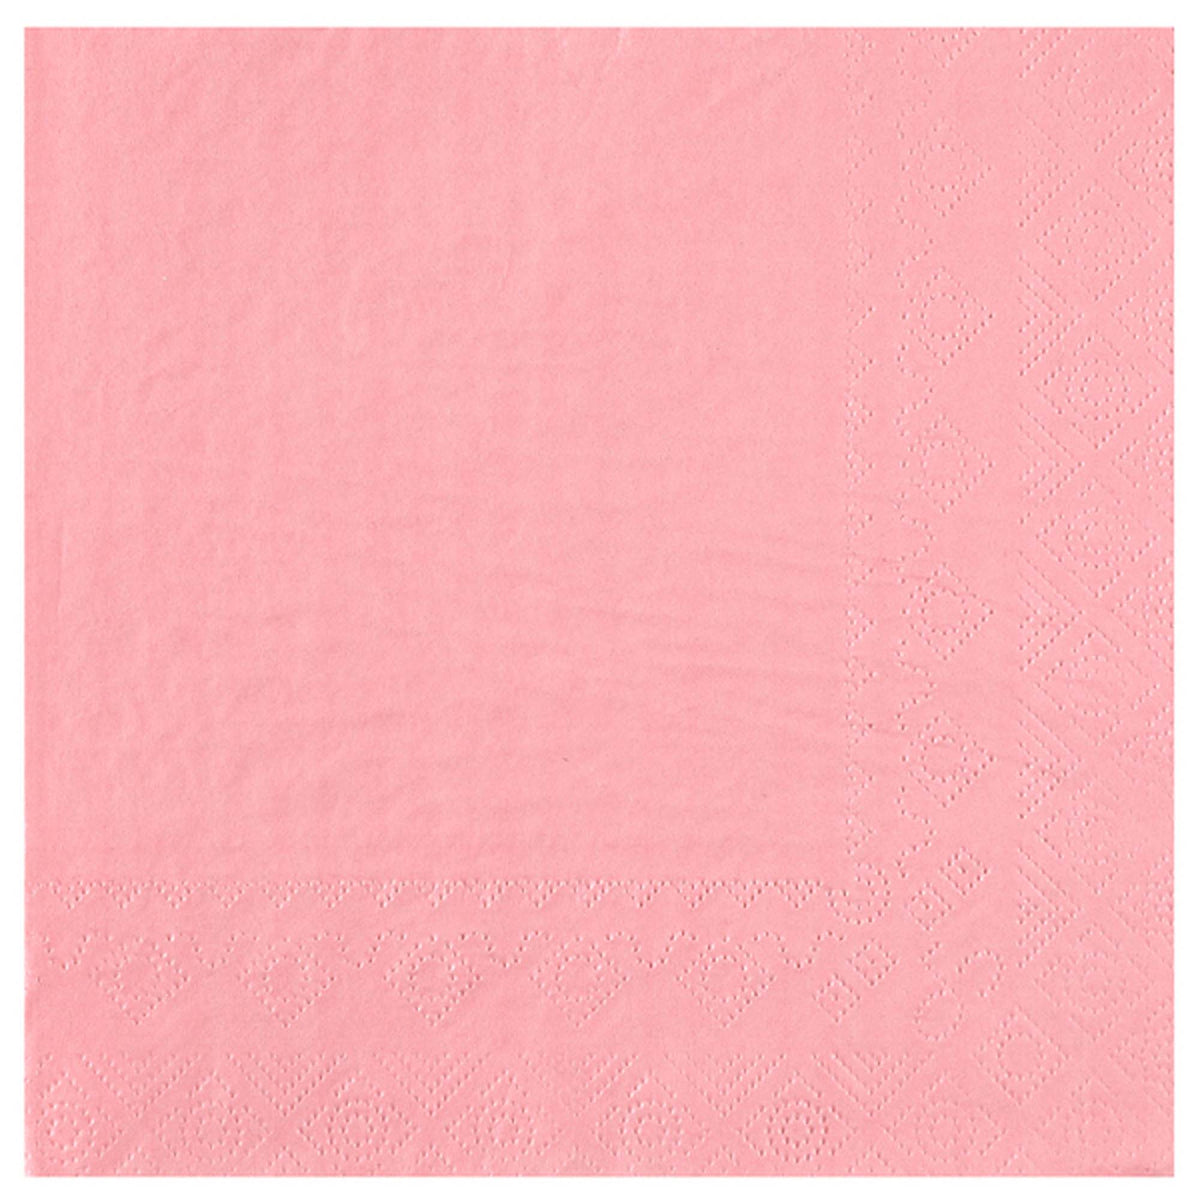 SANTEX Everyday Entertaining Pink Large Lunch Napkins, 25 Count 3660380090021